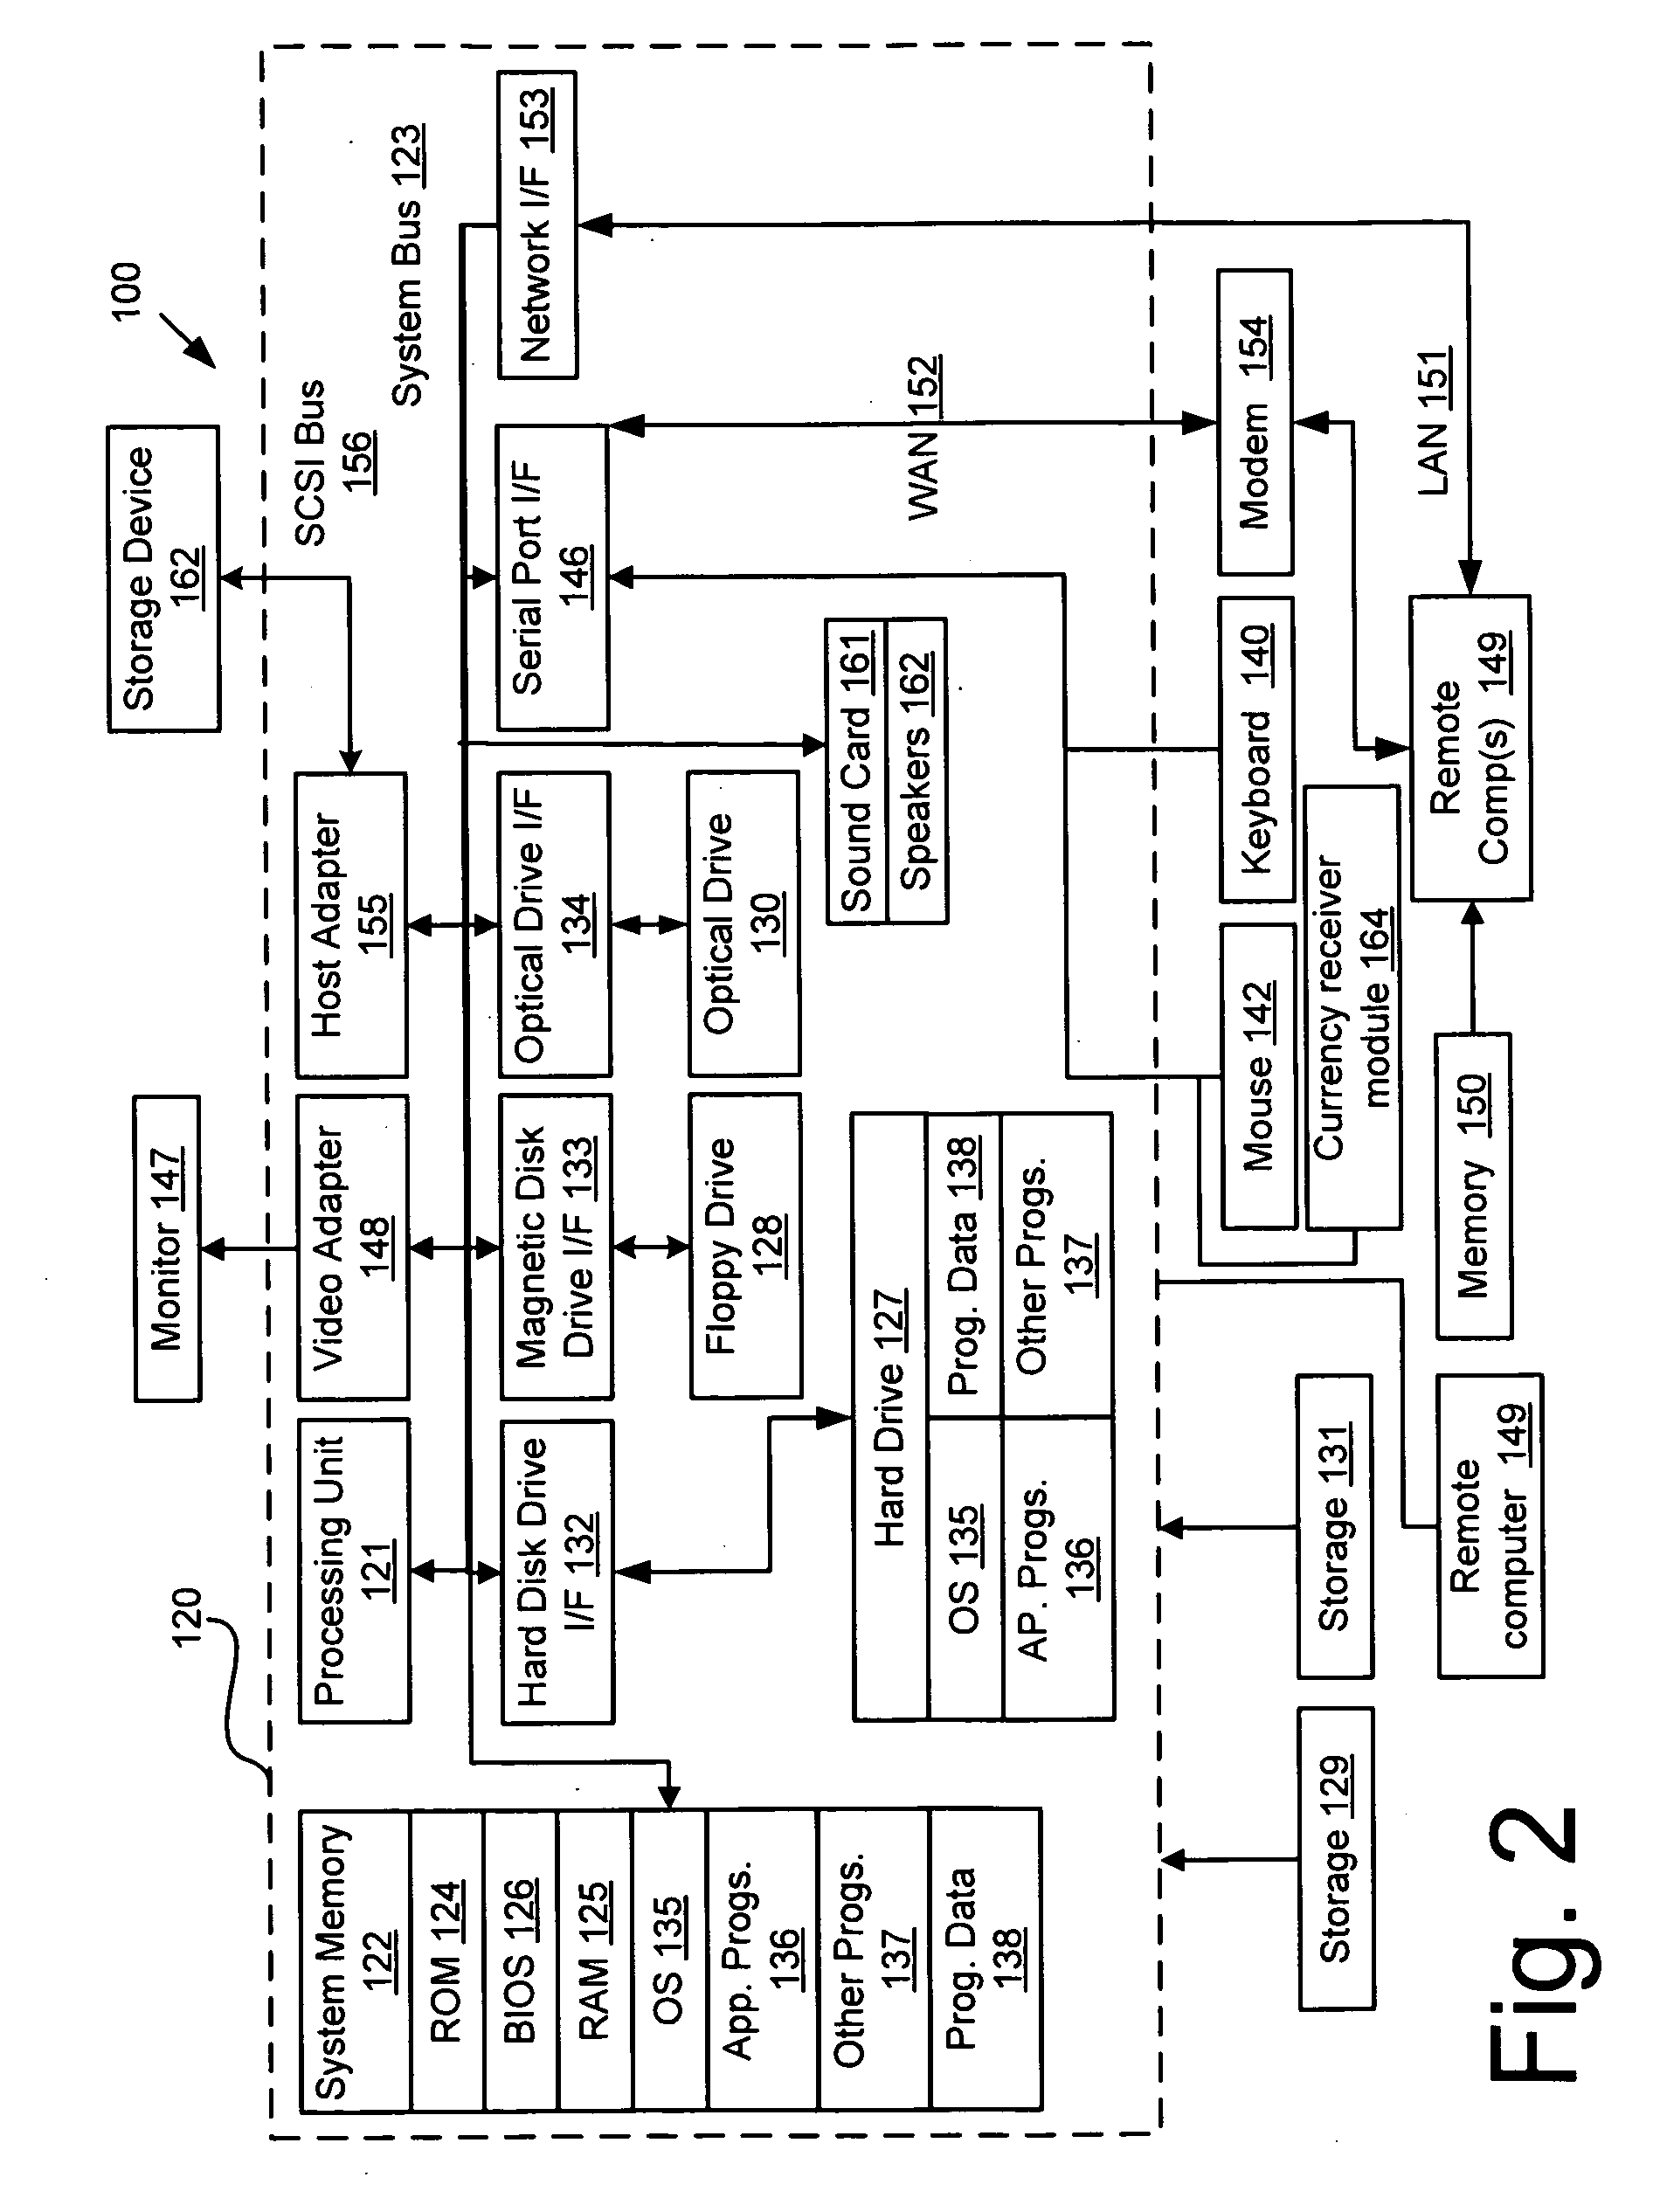 Apparatus for gathering, transferring, and auditing payment information